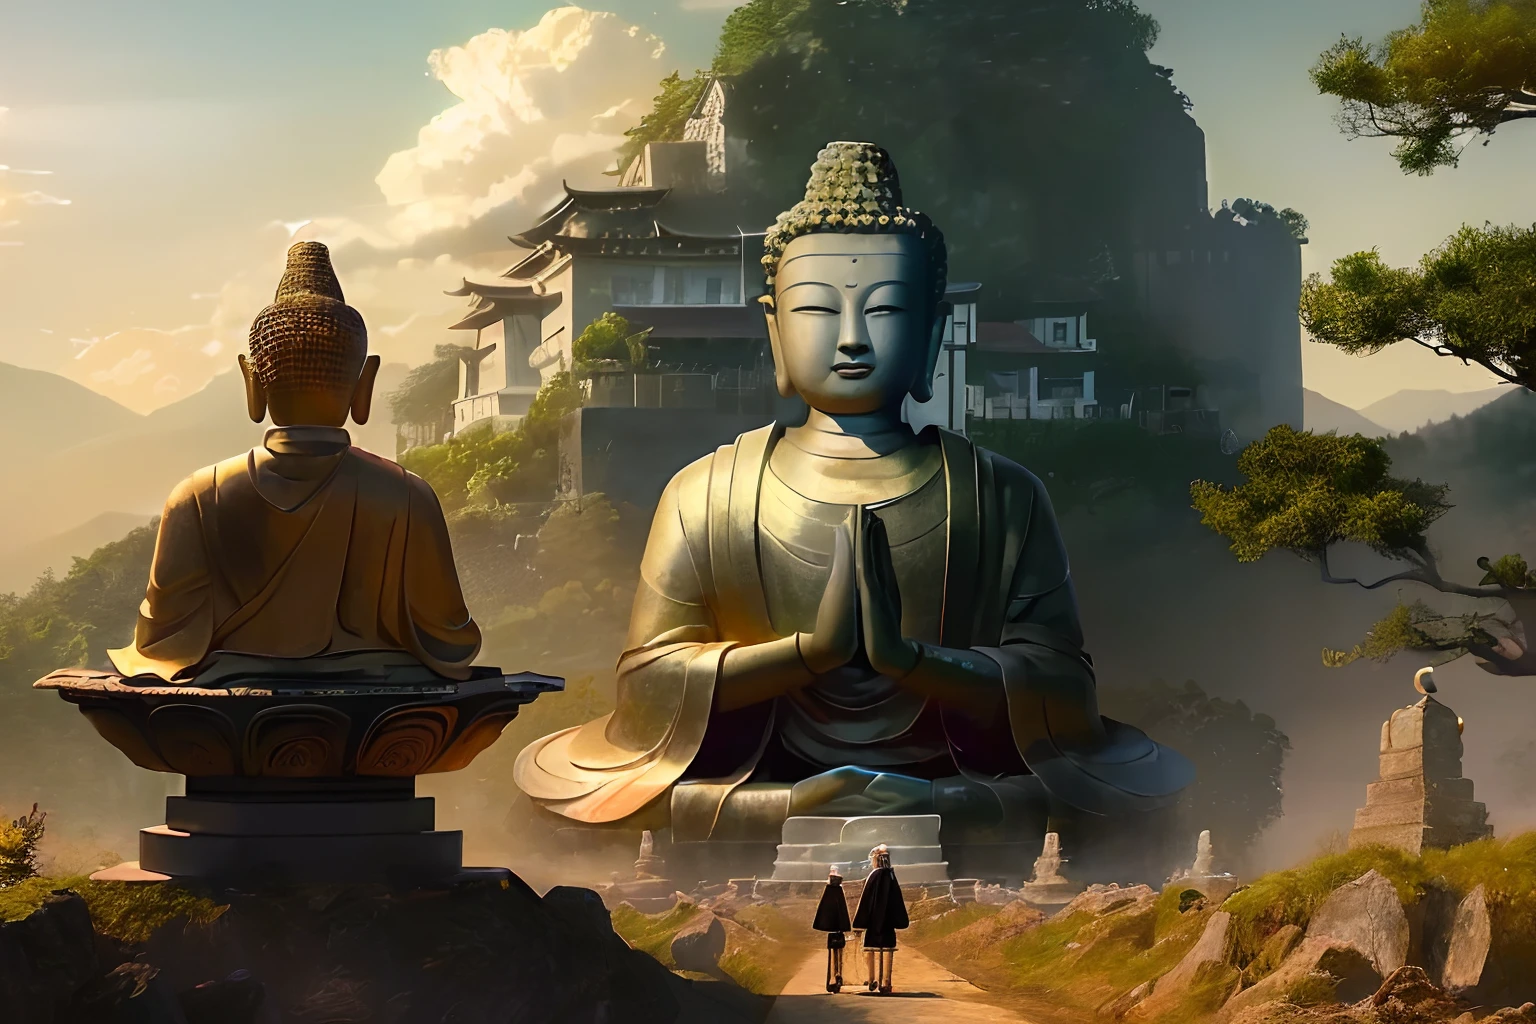 (2 pilgrims on the way:1.5), In the distance is a huge tall Buddha statue in the mountains,Covered in moss, Peaceful face,Stoic face, a Buddhist Buddha, Buddhism, Buddha, Buddhist, The rising sun shines golden in the sky,The holy light shines on the Buddha statue，Zen temple background,Verism, En plein air, Cinematic lighting, stereograms, Masterpiece, hyper HD, Best quality